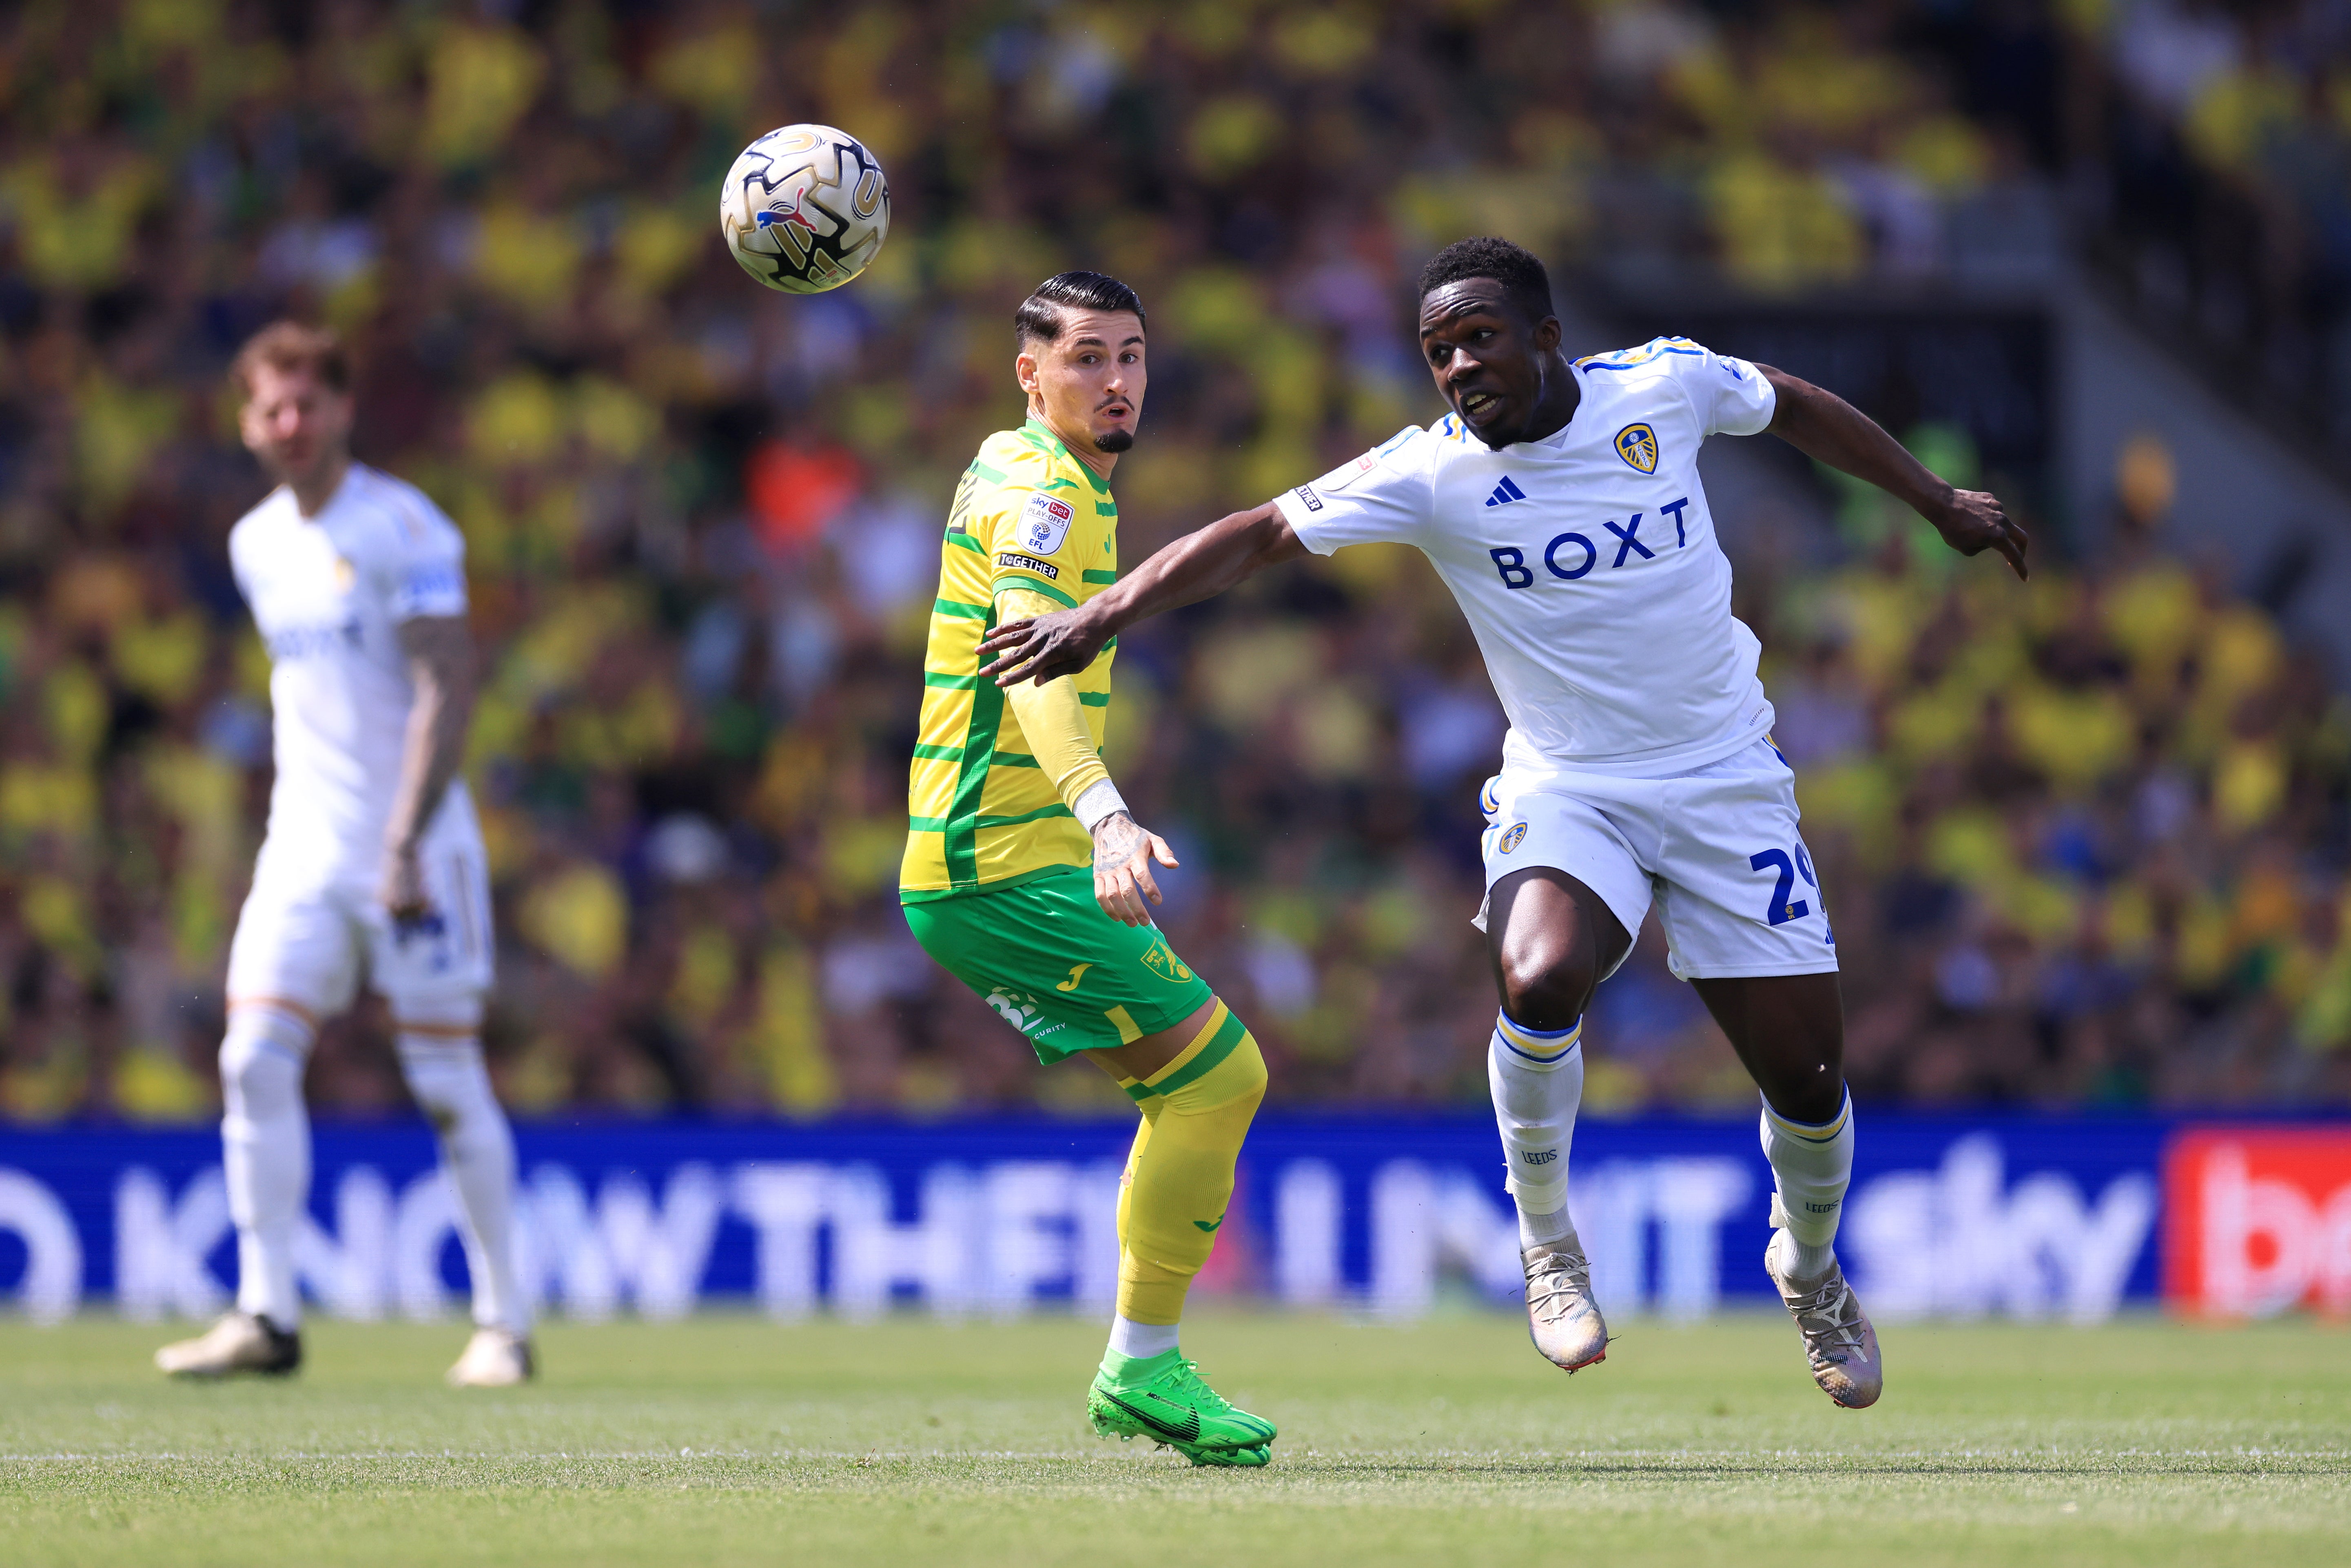 Norwich and Leeds played out a 0-0 draw in the play-off semi-final first leg